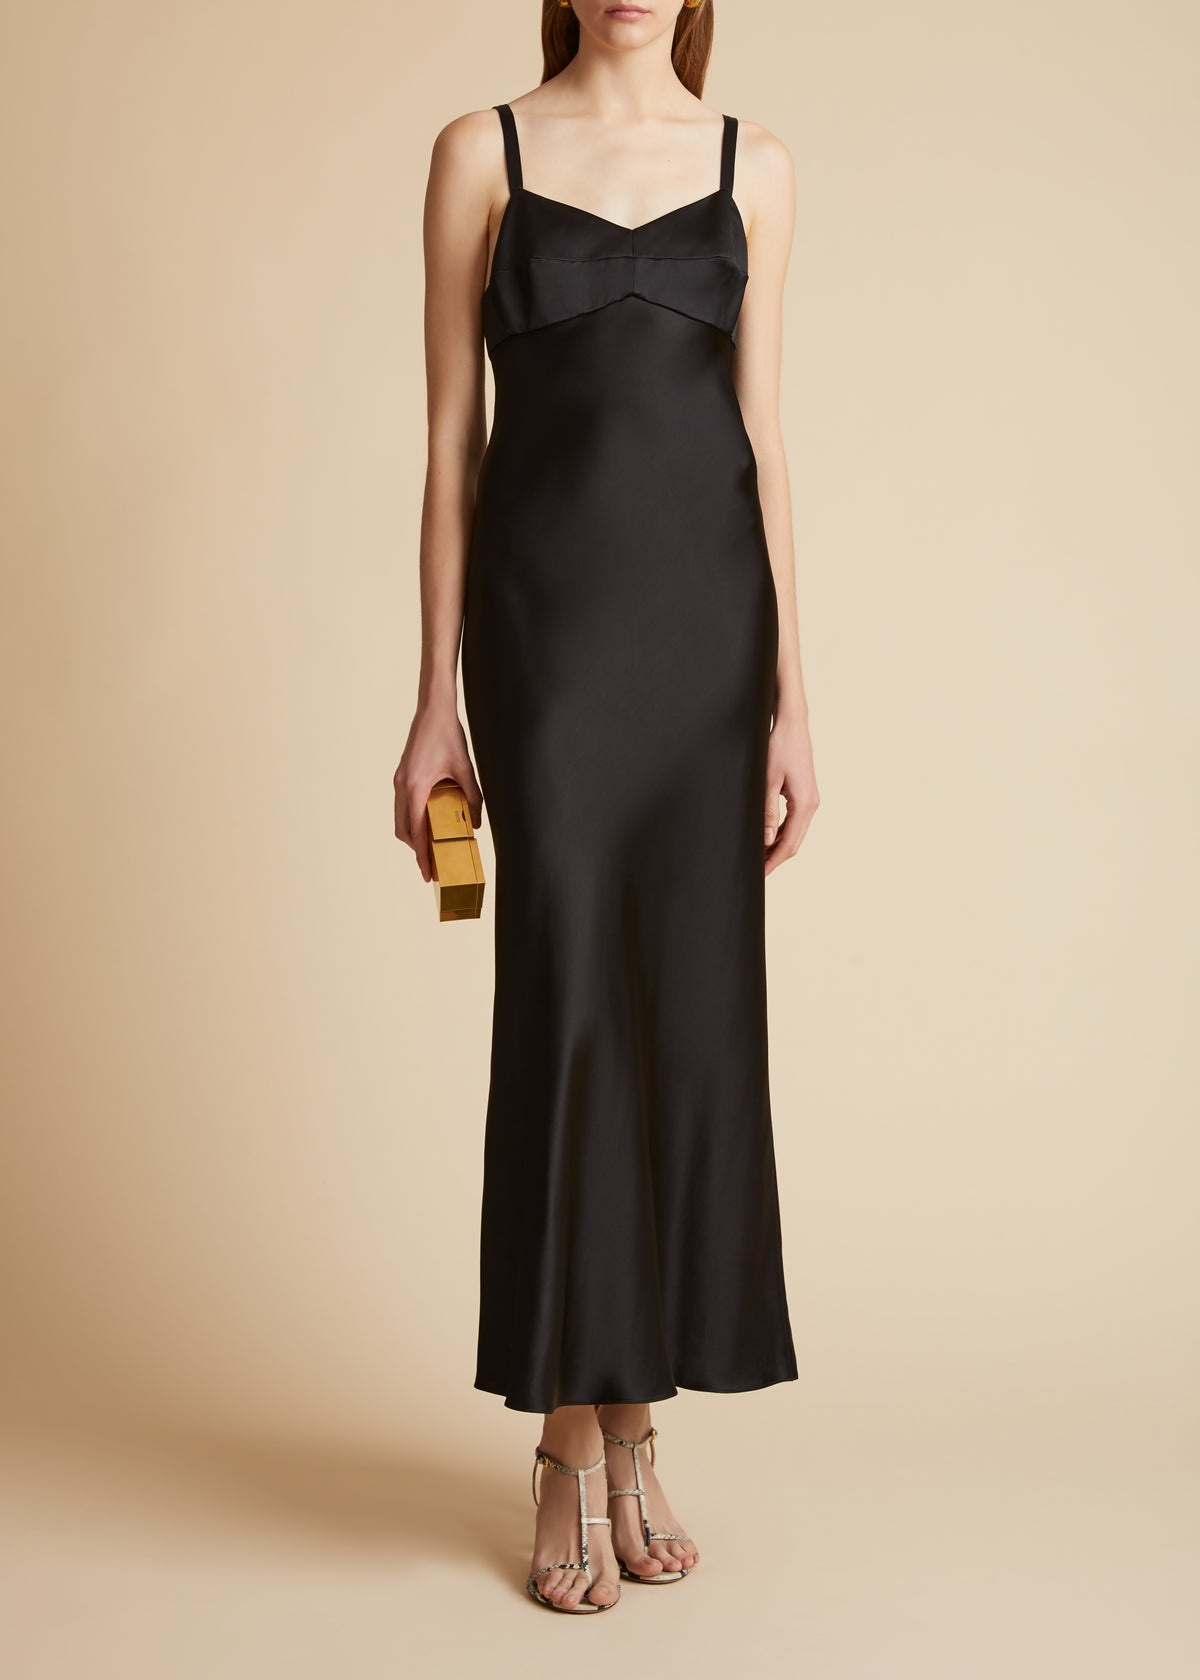 The Joely Dress in Black - 1